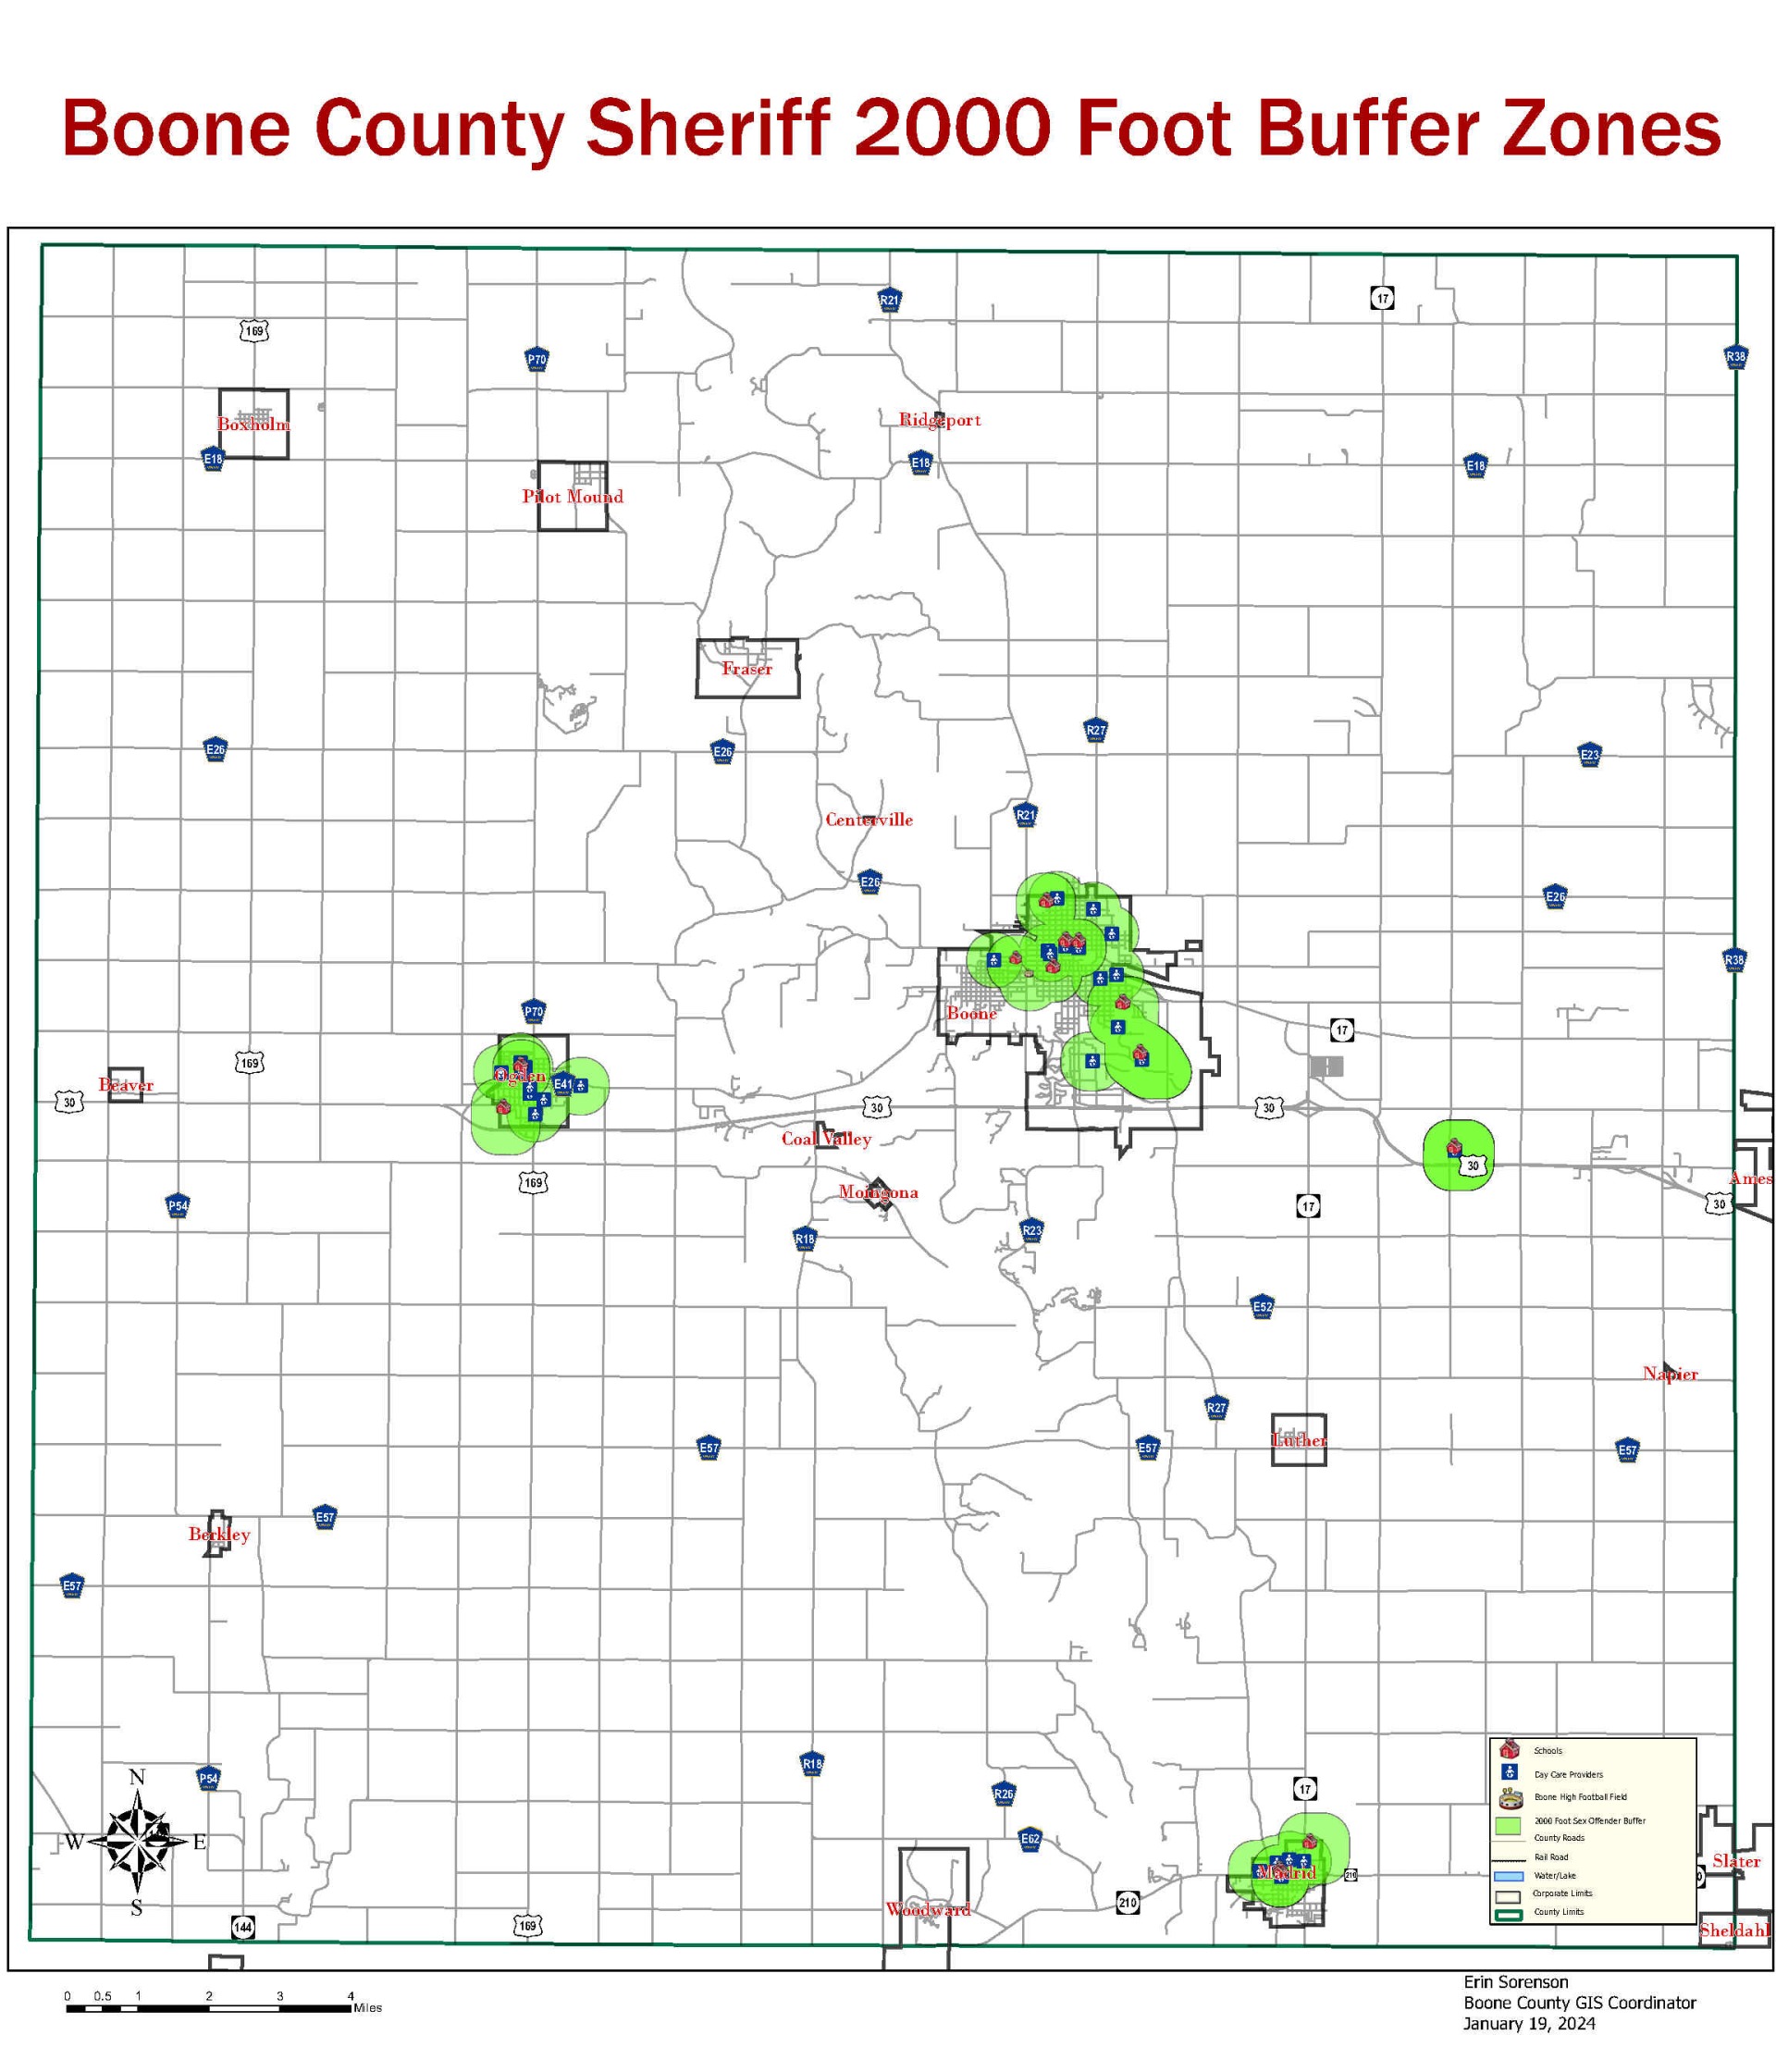 Sex Offender Registry Buffer Zone map for Boone County, Iowa